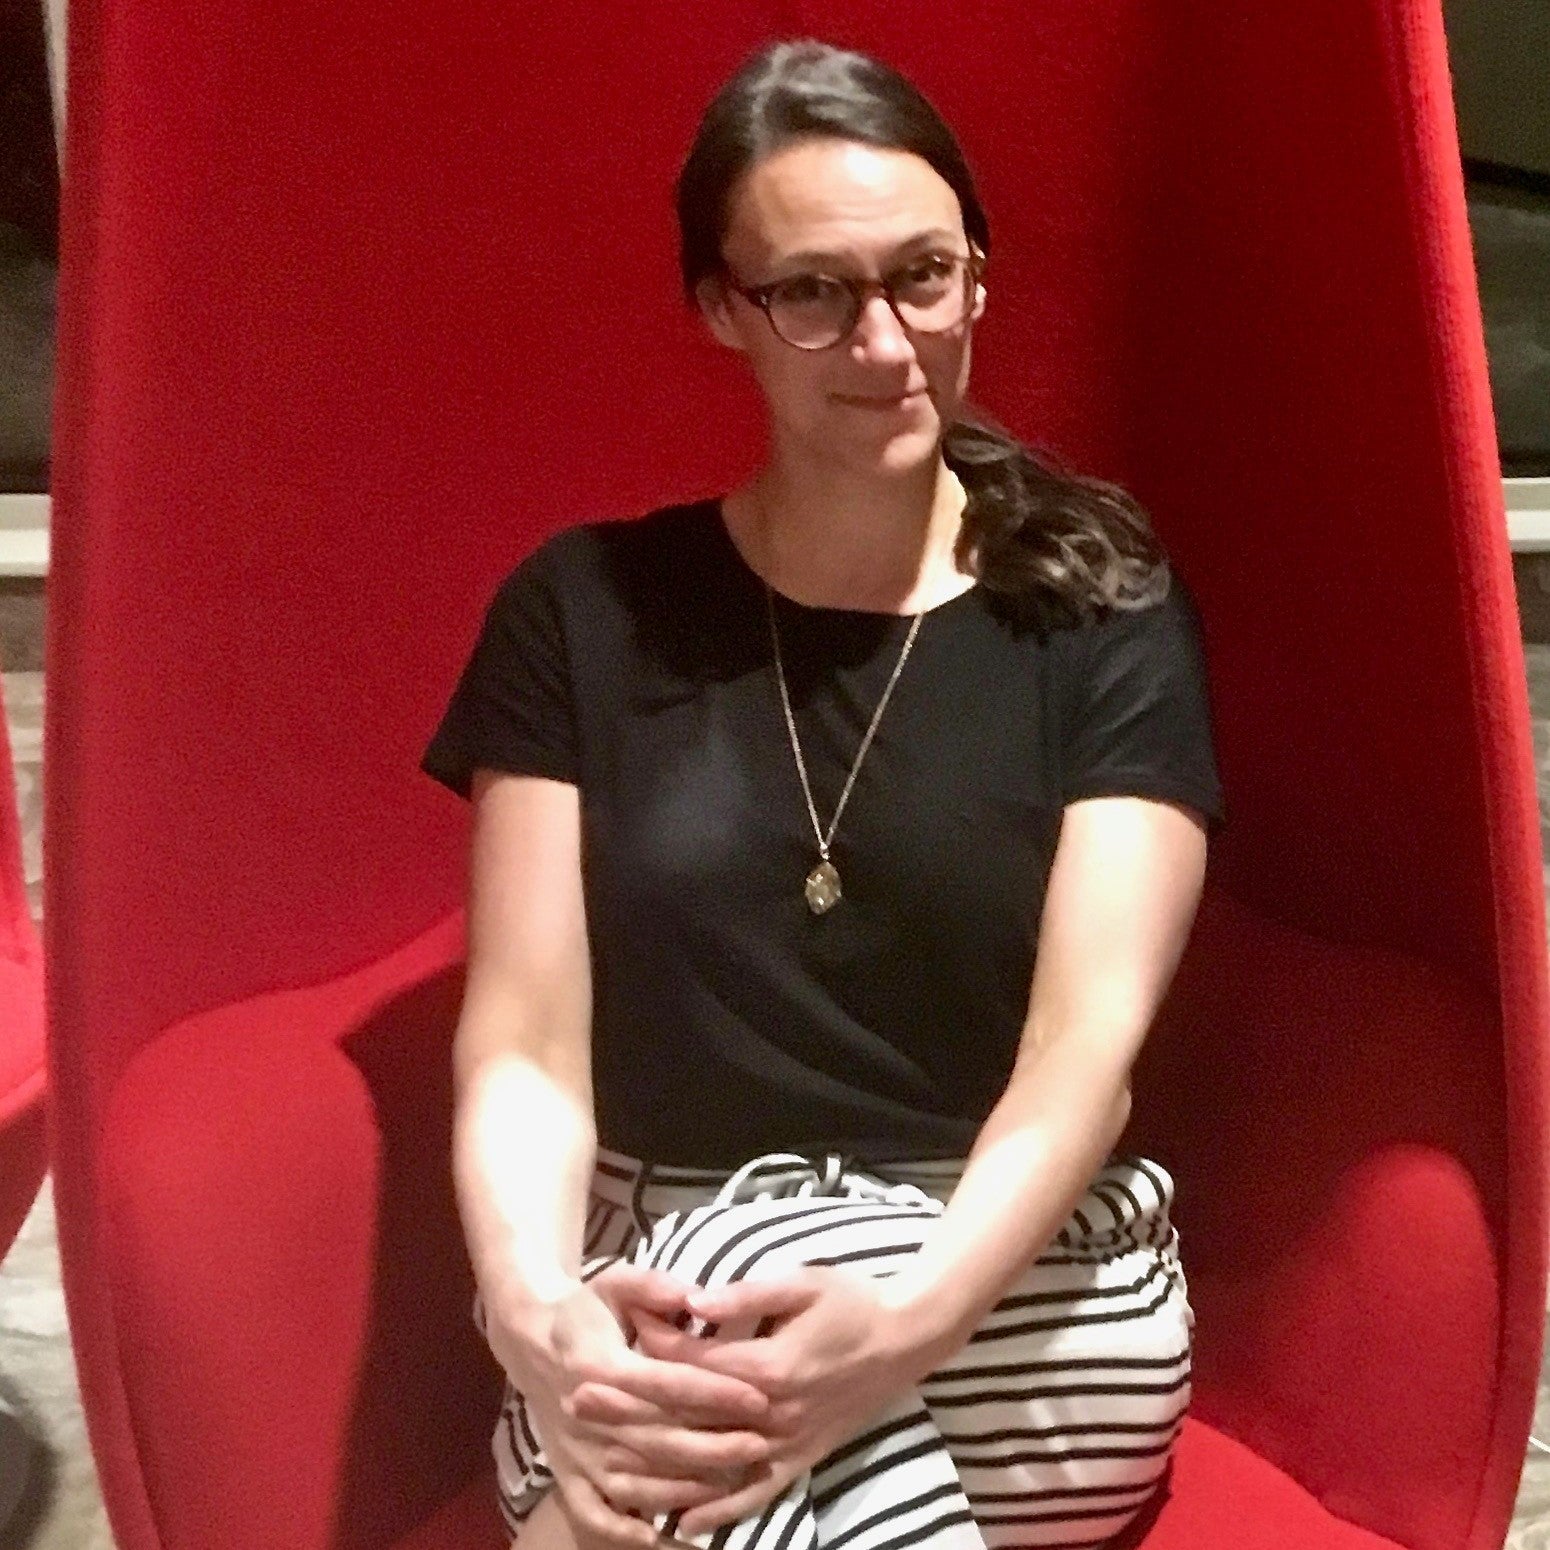 Sarah Shropshire sitting on a red chair